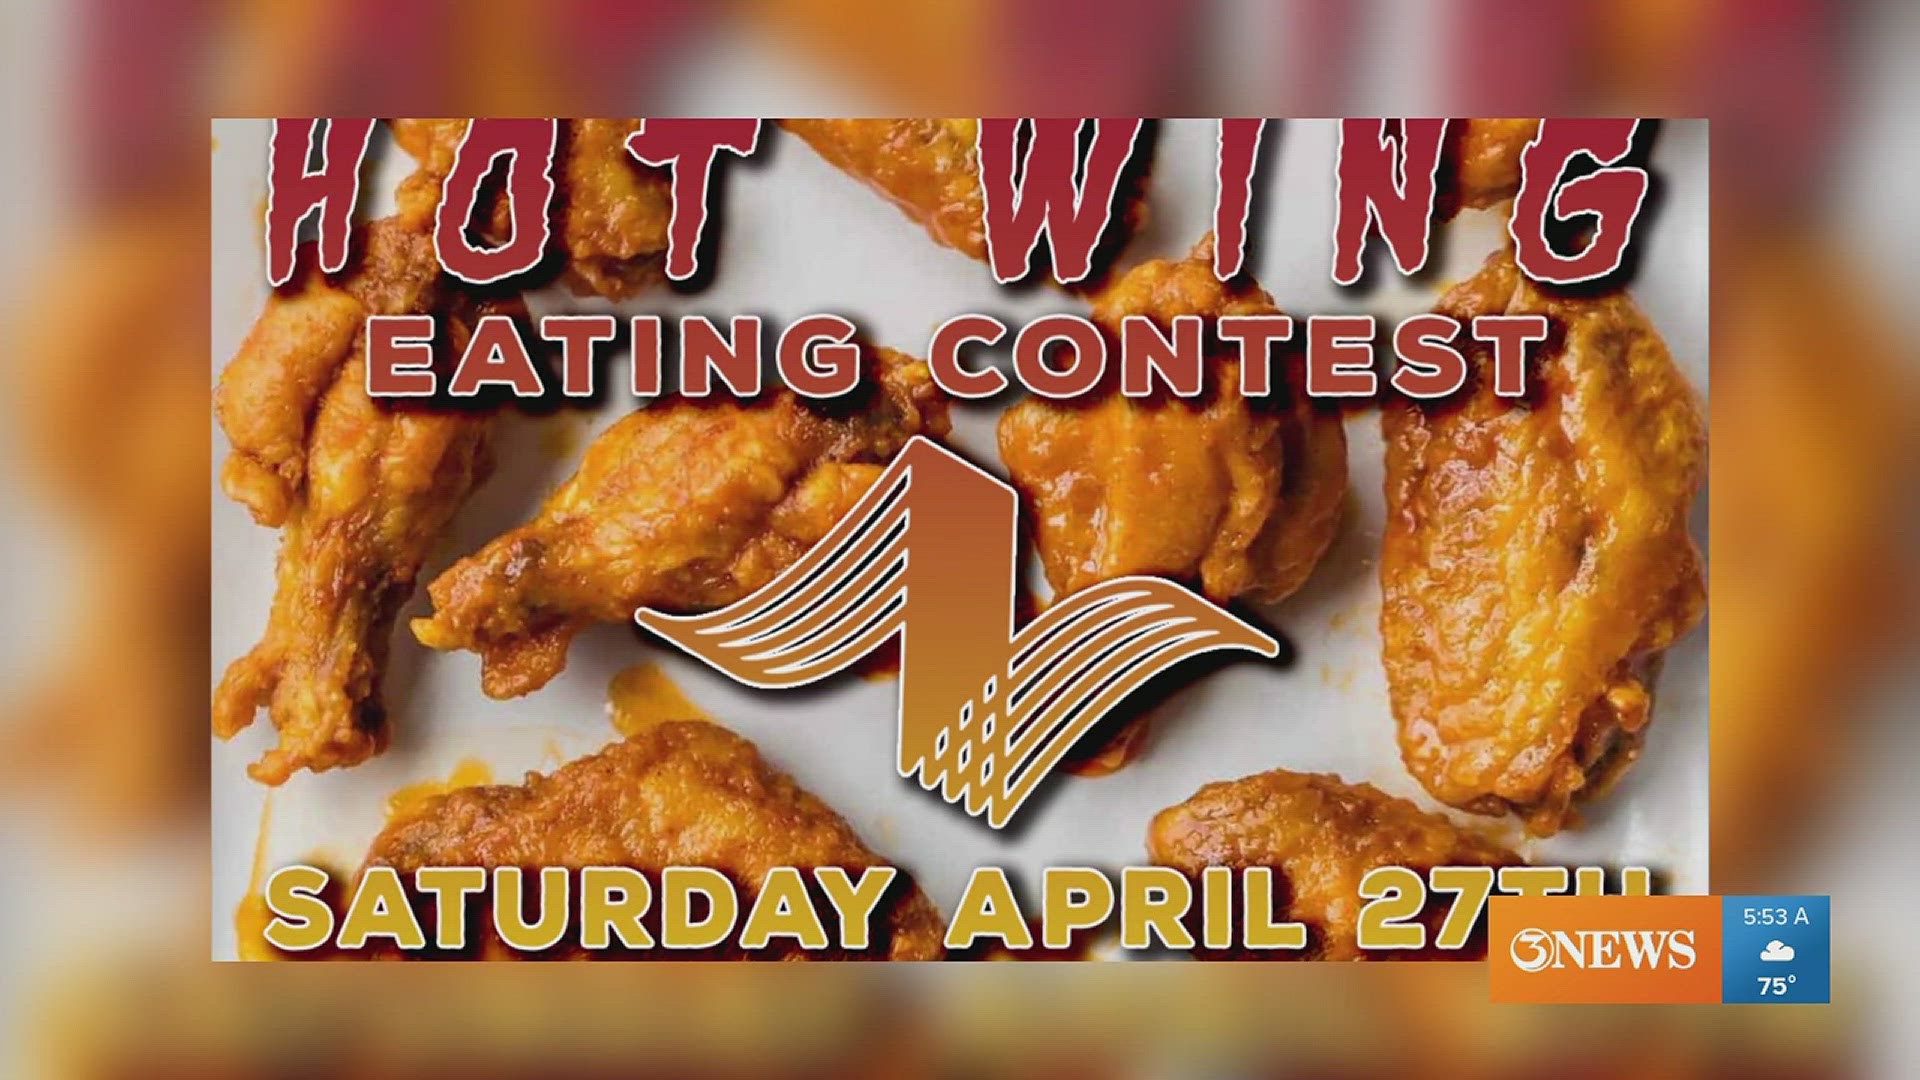 Hot wing eating contests, the Market of Hope fundraiser, Children's Day and an event for new Girl Scouts!